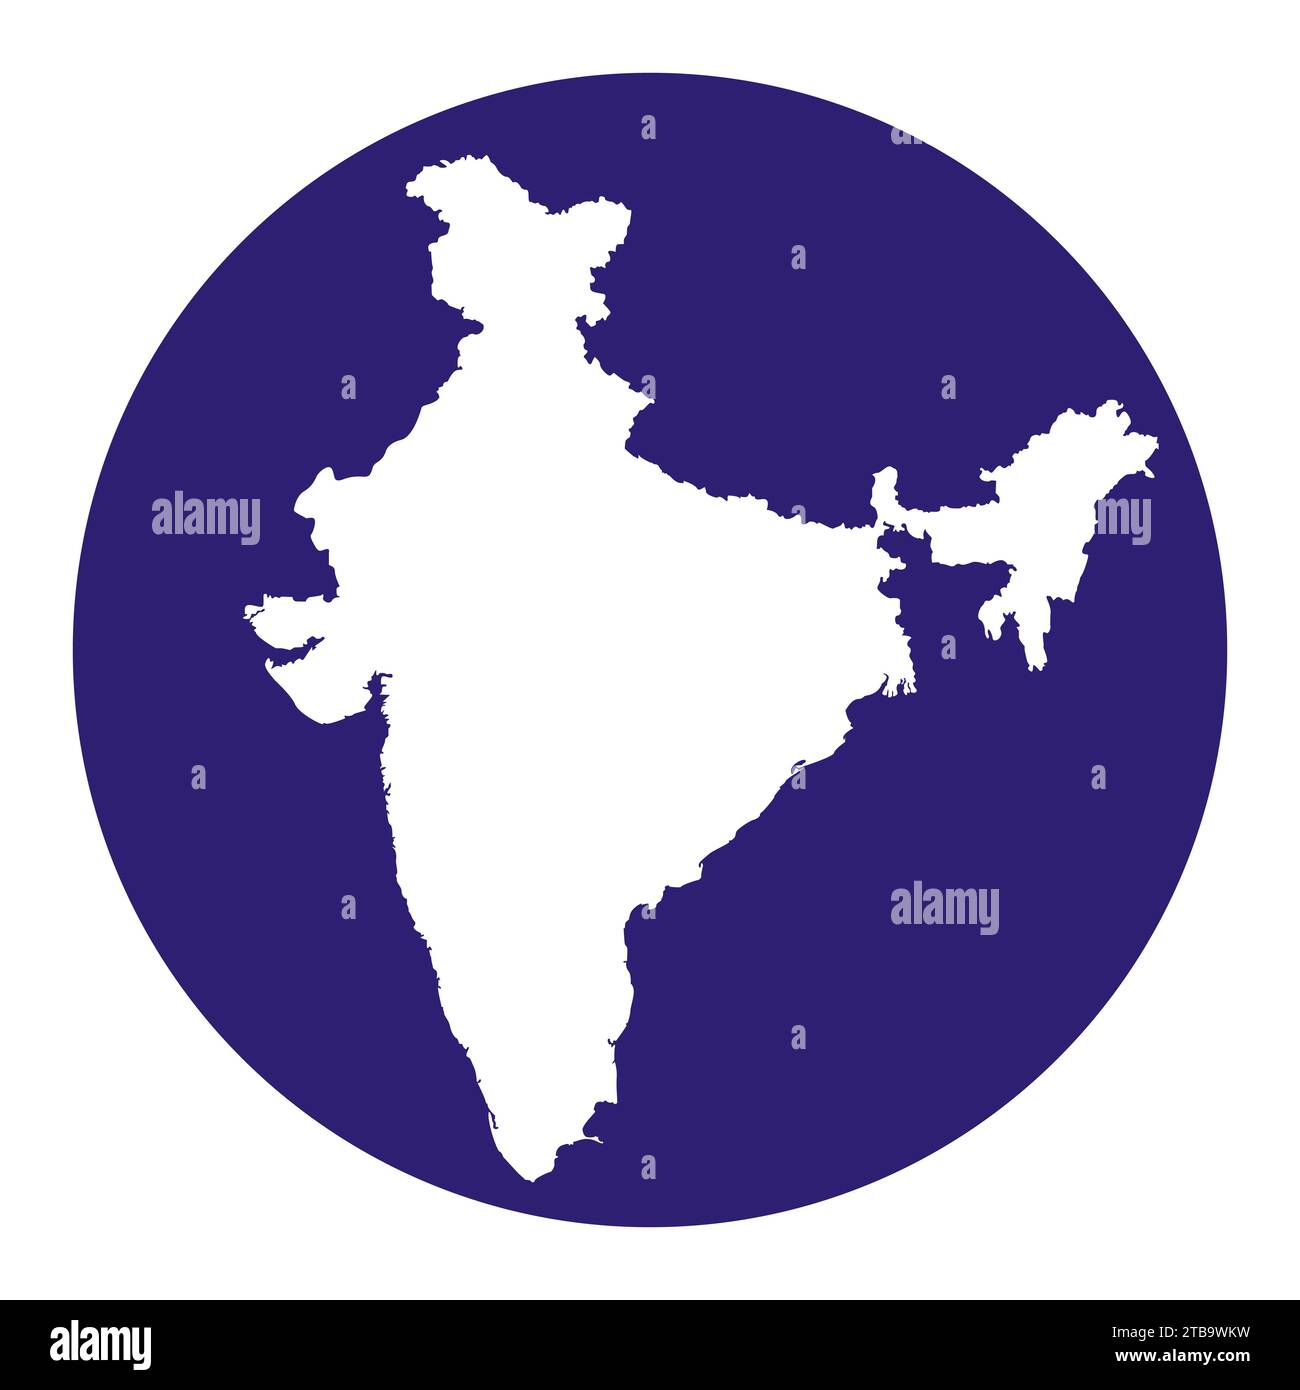 India Map isolated on the blue circle. Stock Vector